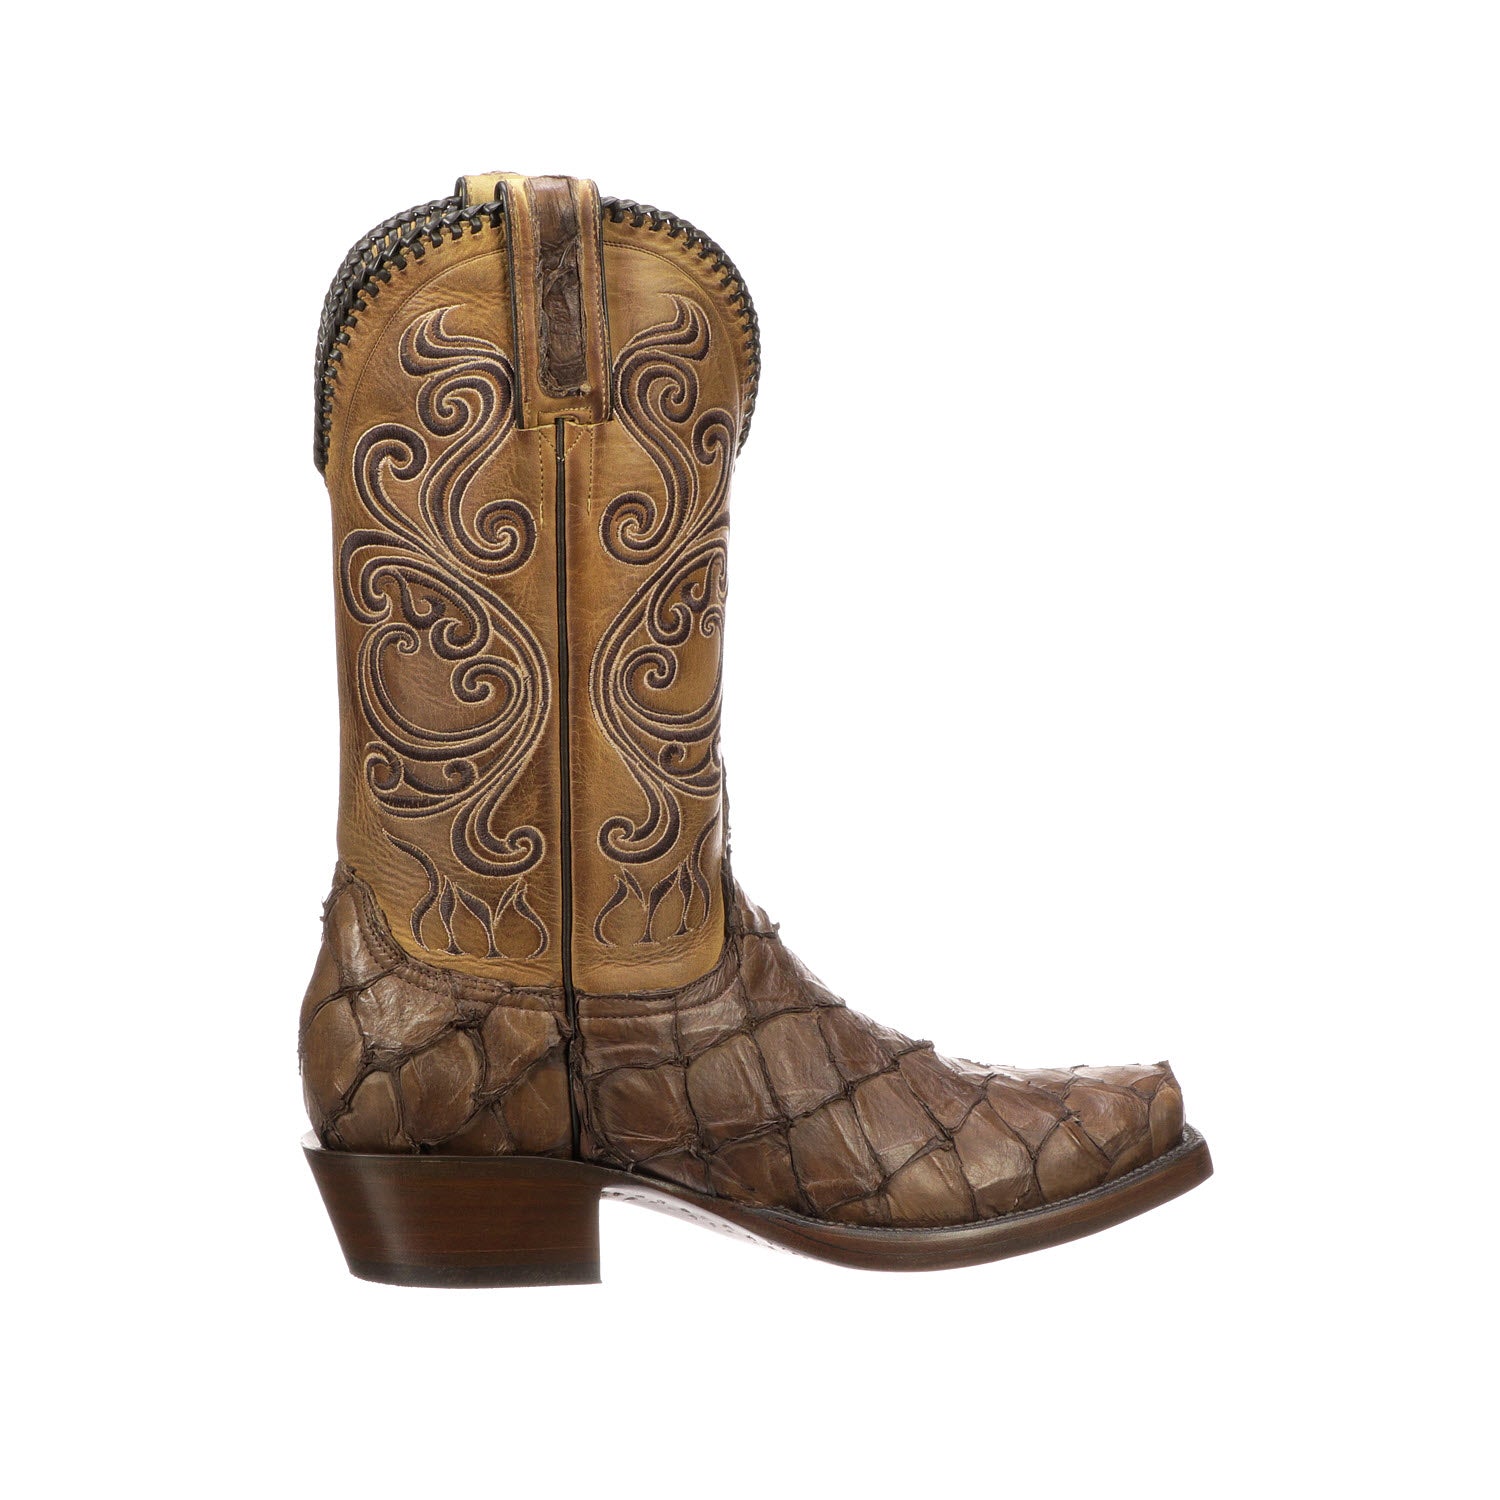 Fish Boots - Lucchese